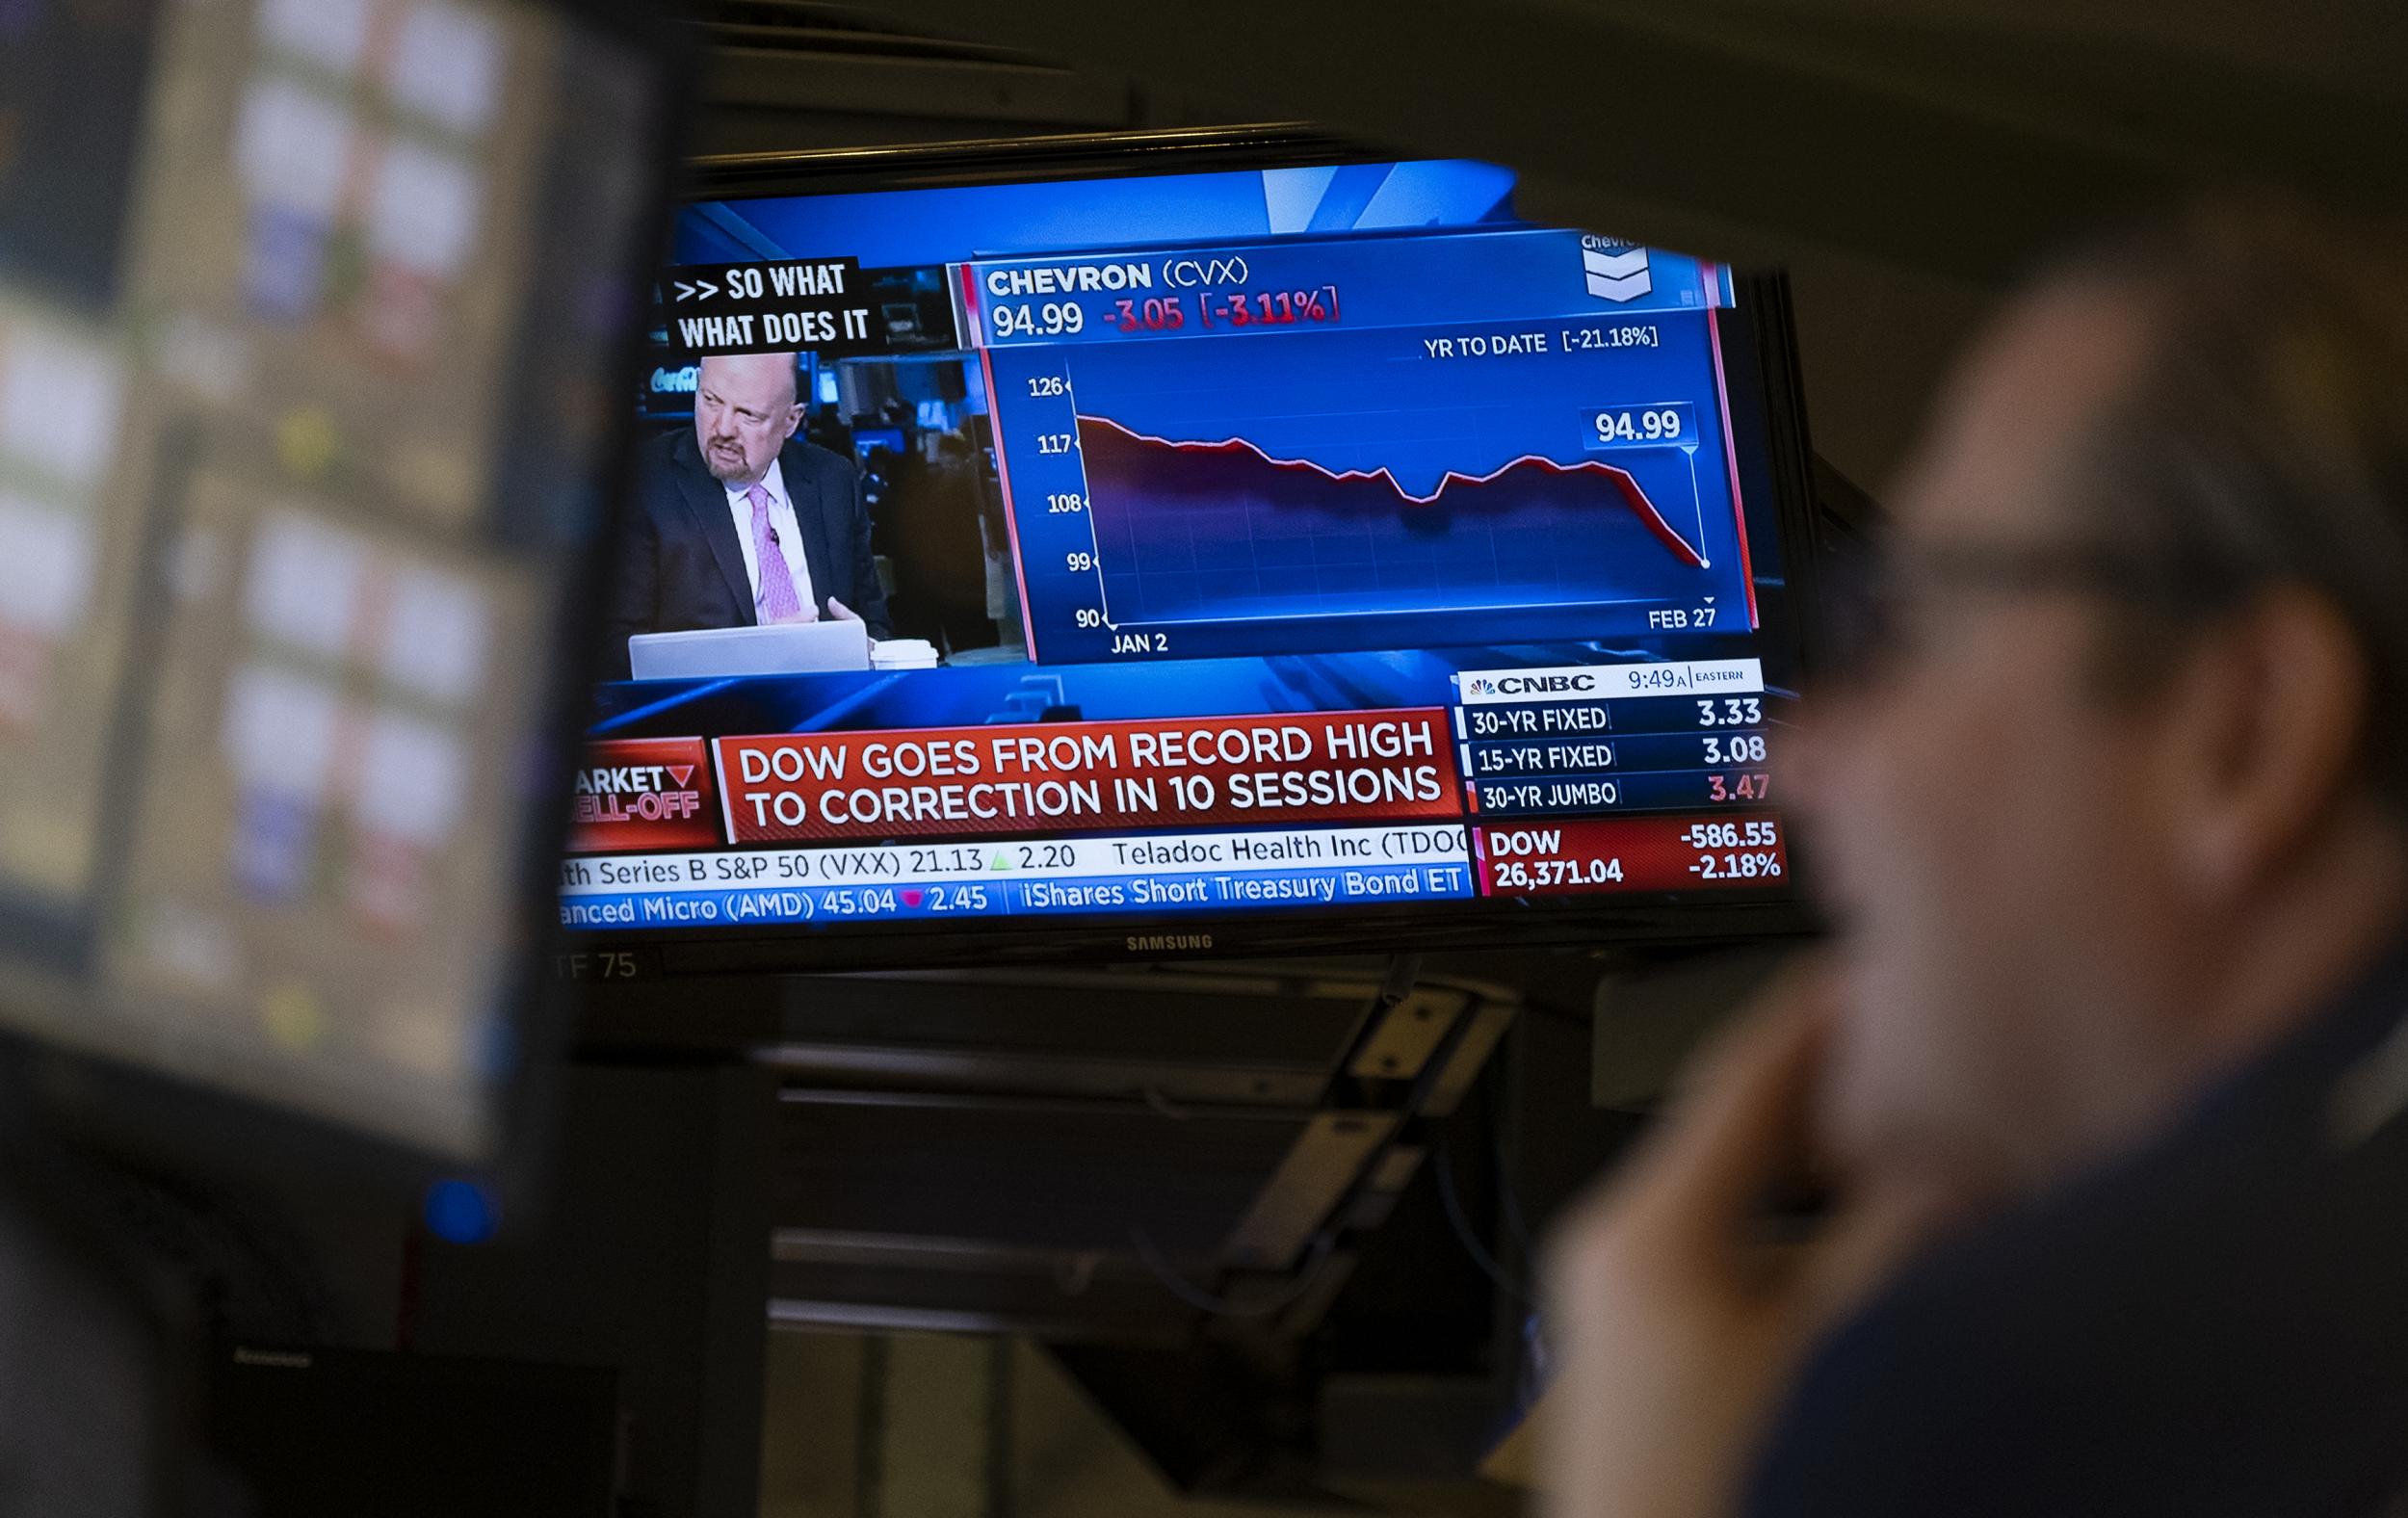 Stocks reflect declines on monitors as people work on the floor of the New York Stock Exchange on Thursday, 27 February, 2020